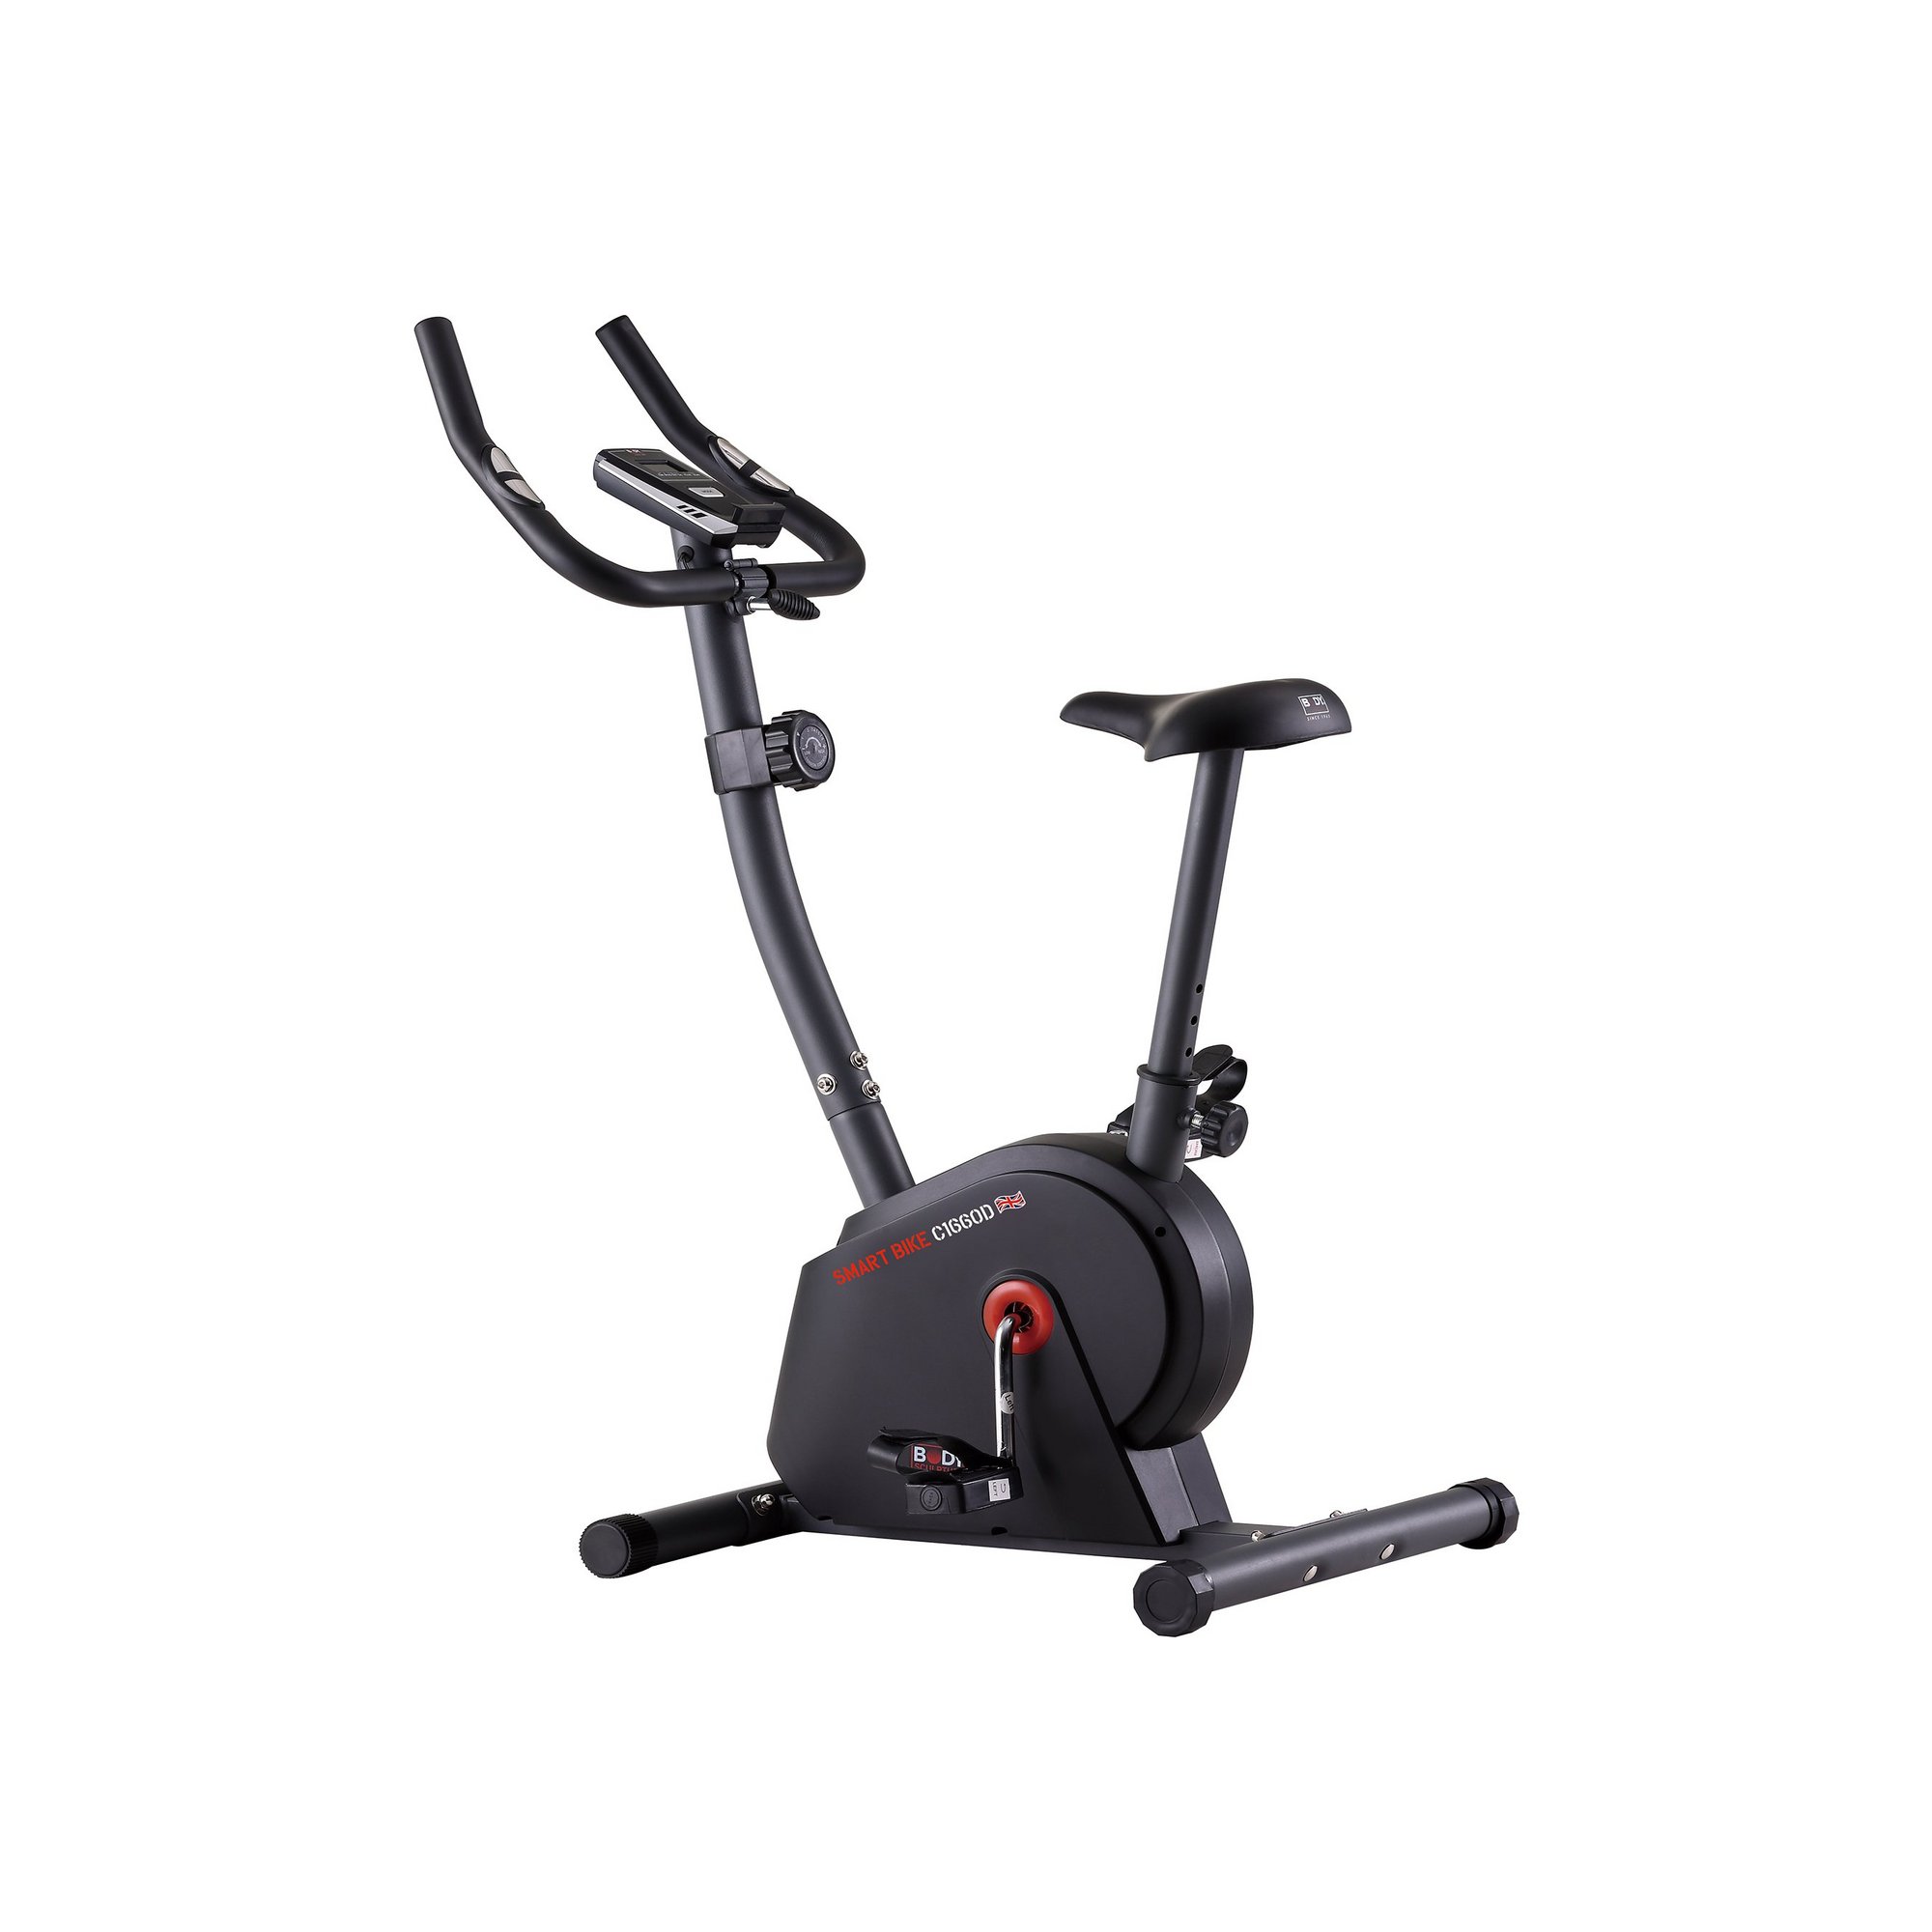 Body Sculpture Body Sculpture Magnetic Exercise Bike with Hand Pulse Sensors | Black